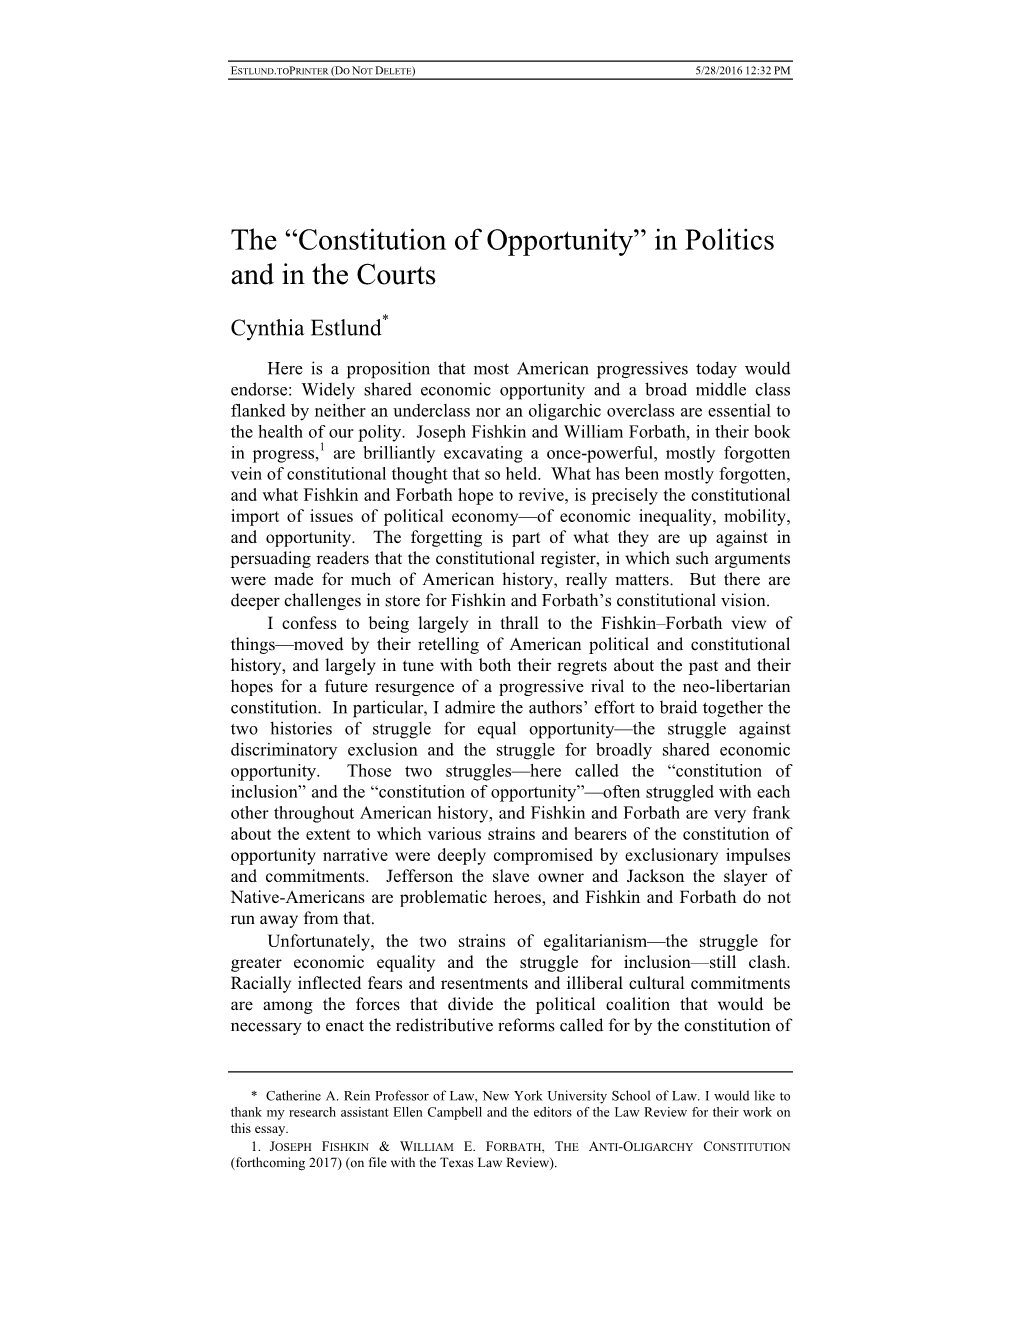 The “Constitution of Opportunity” in Politics and in the Courts